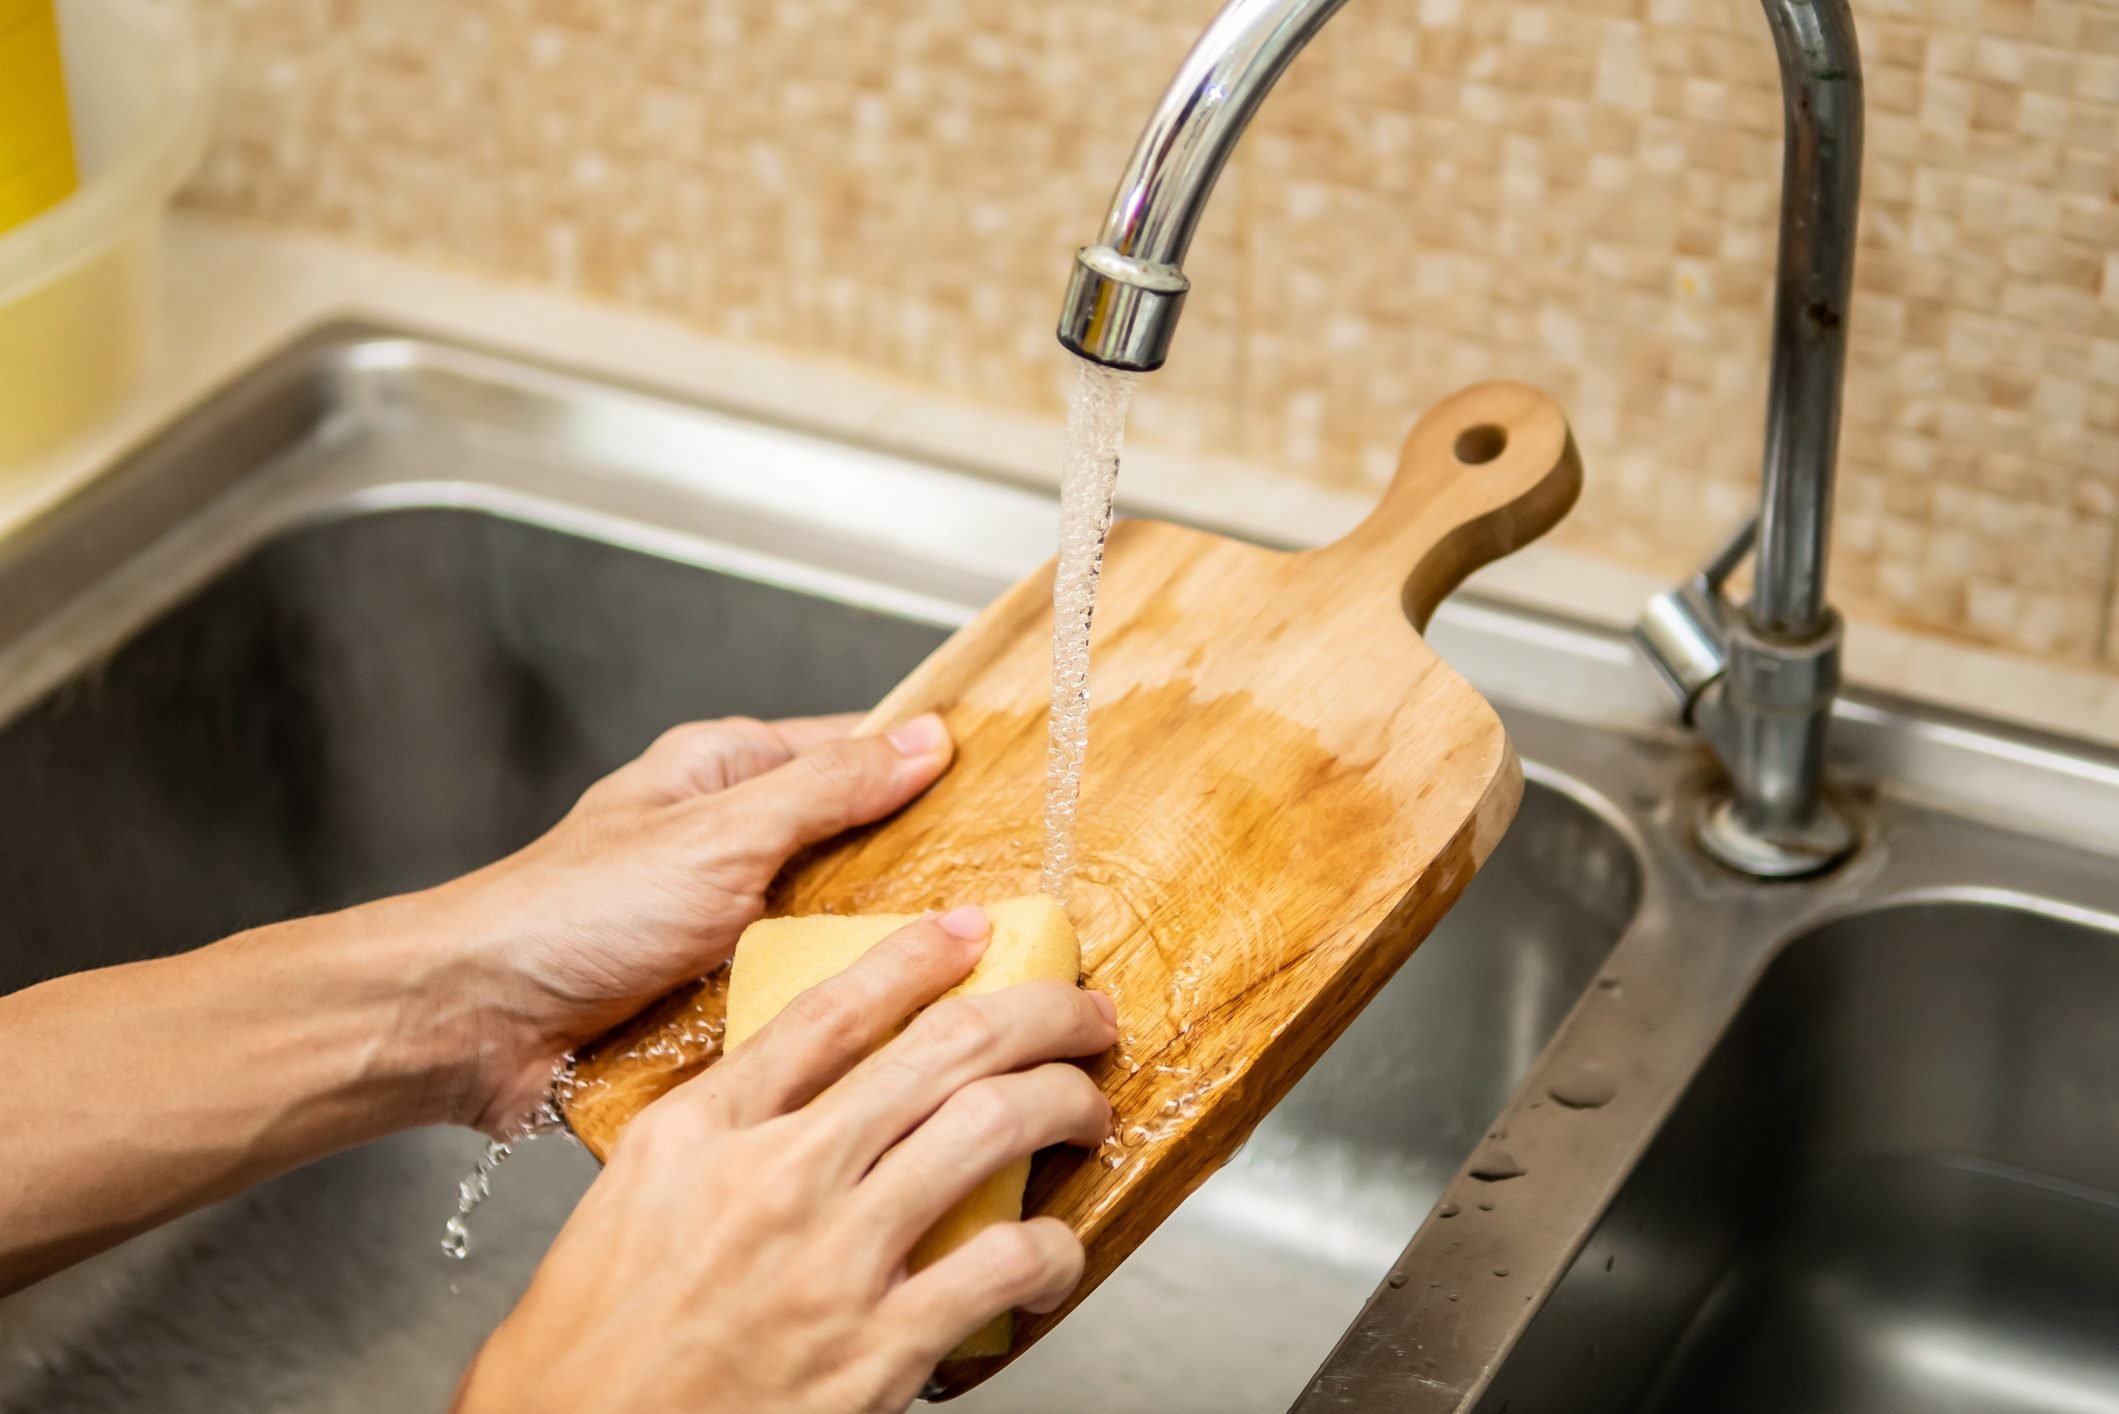 How to Clean a Wooden Cutting Board: 4 Methods